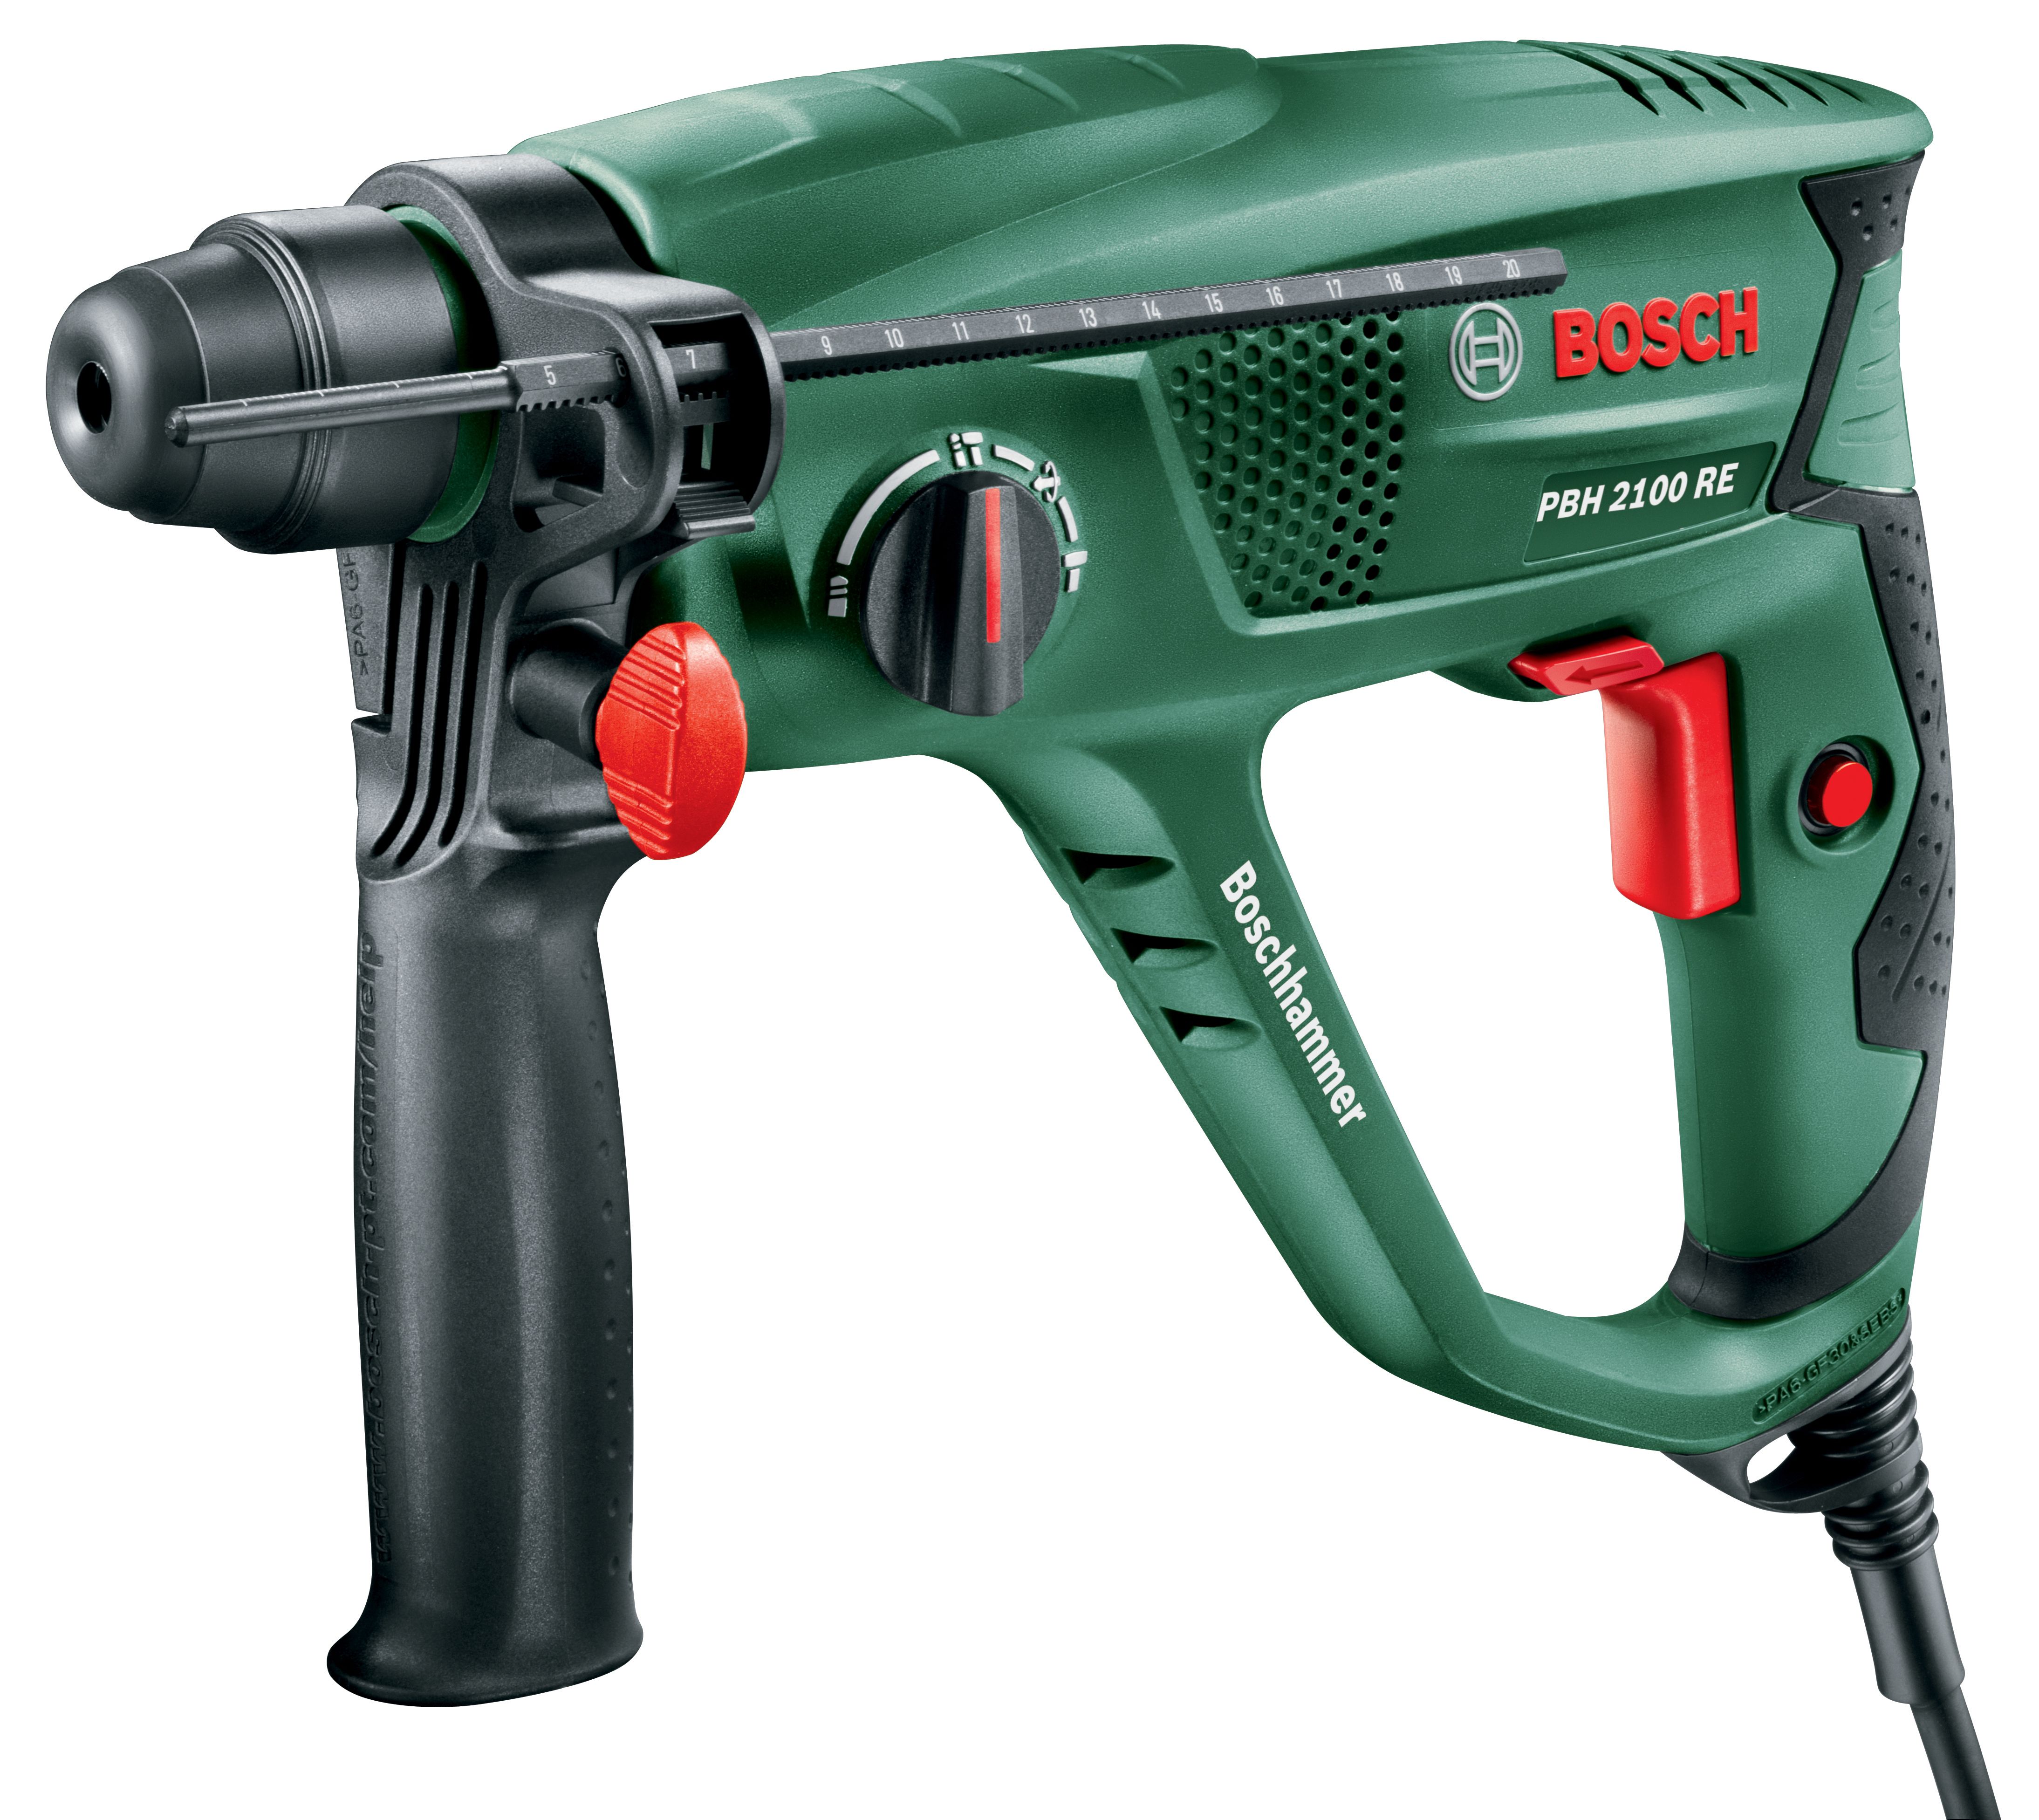 Image of Bosch PBH 2100 RE Rotary Corded Hammer Drill - 550W